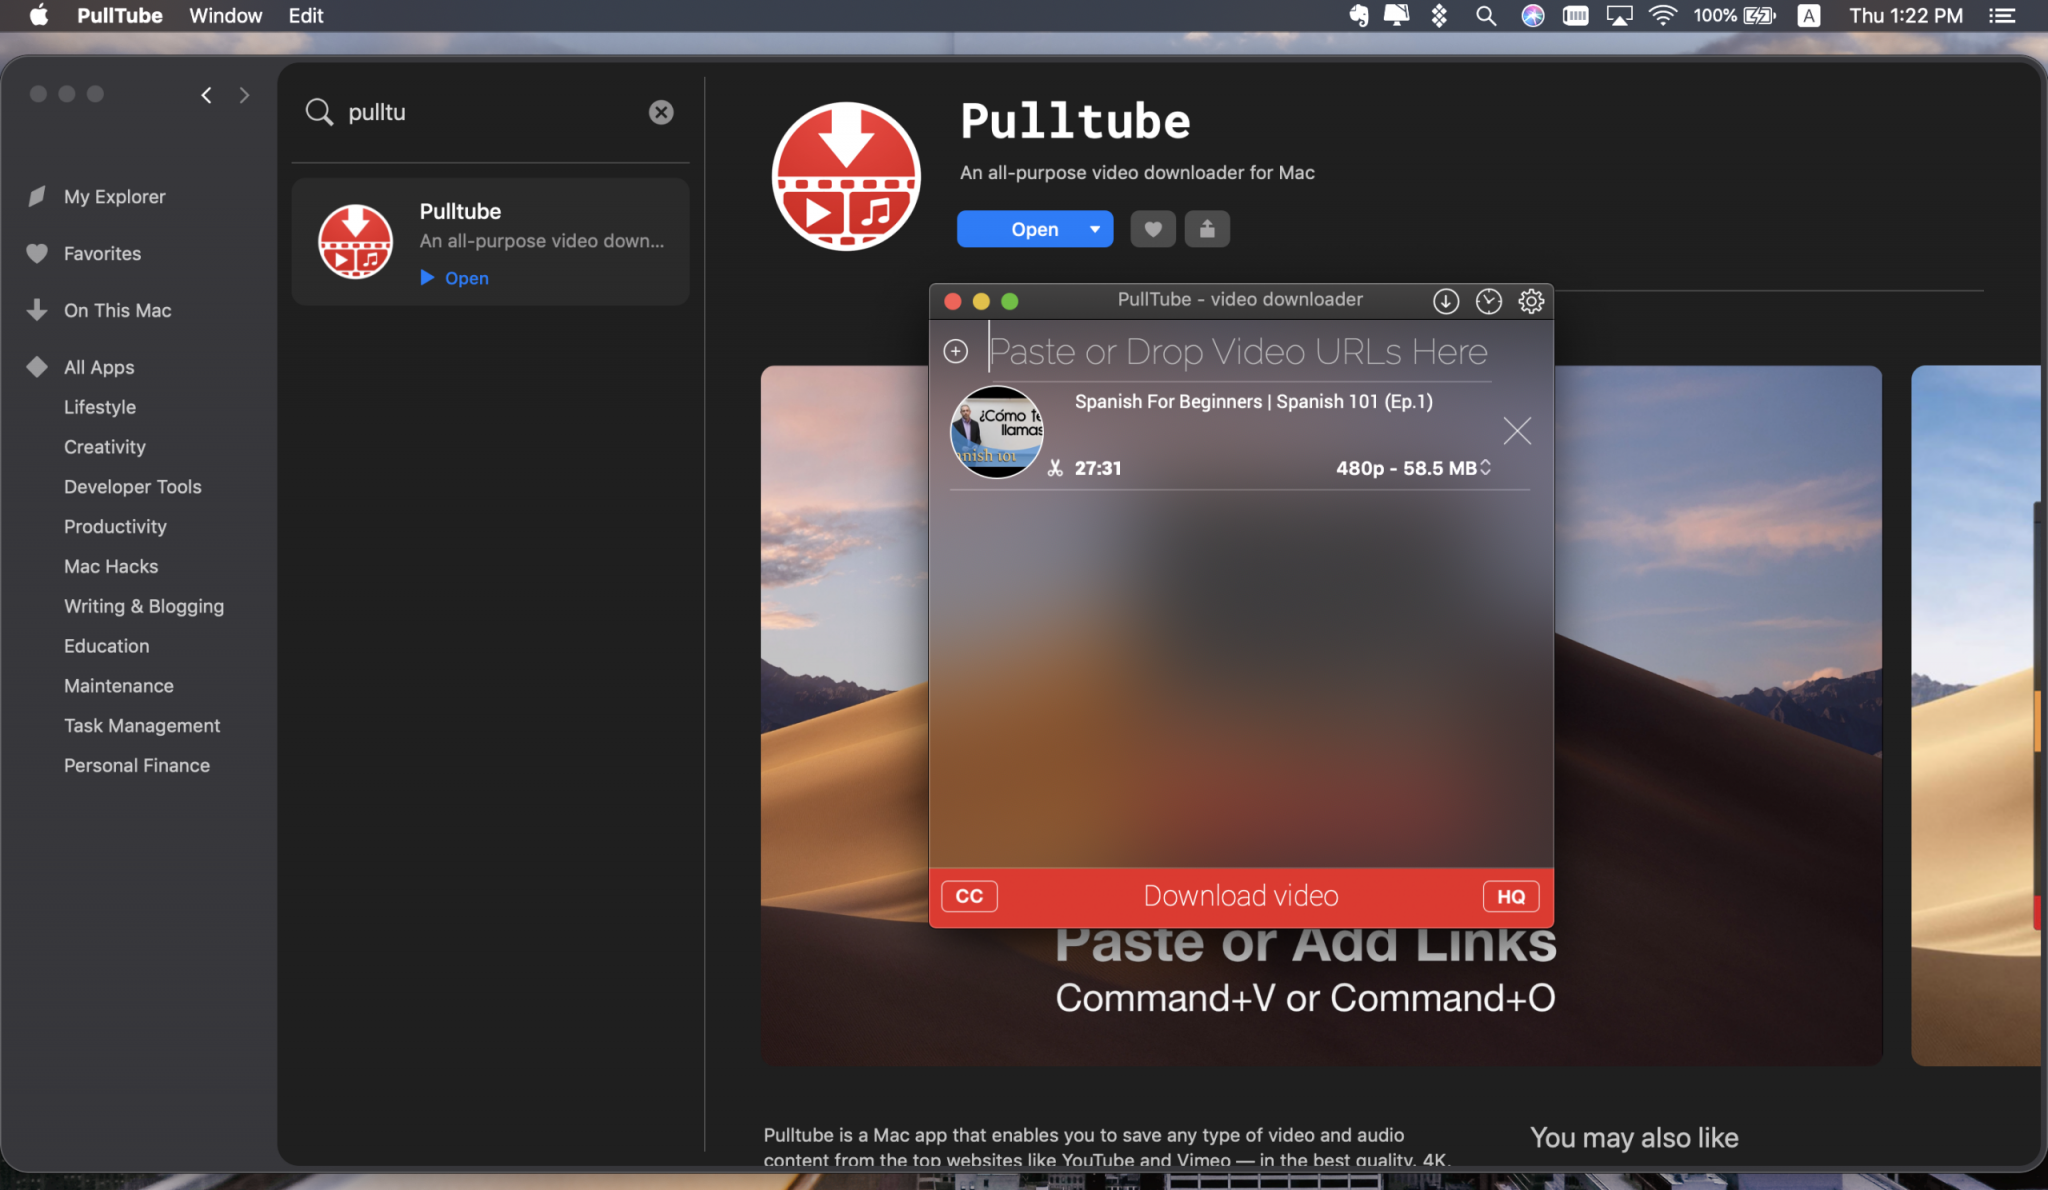 pulltube cant be opened